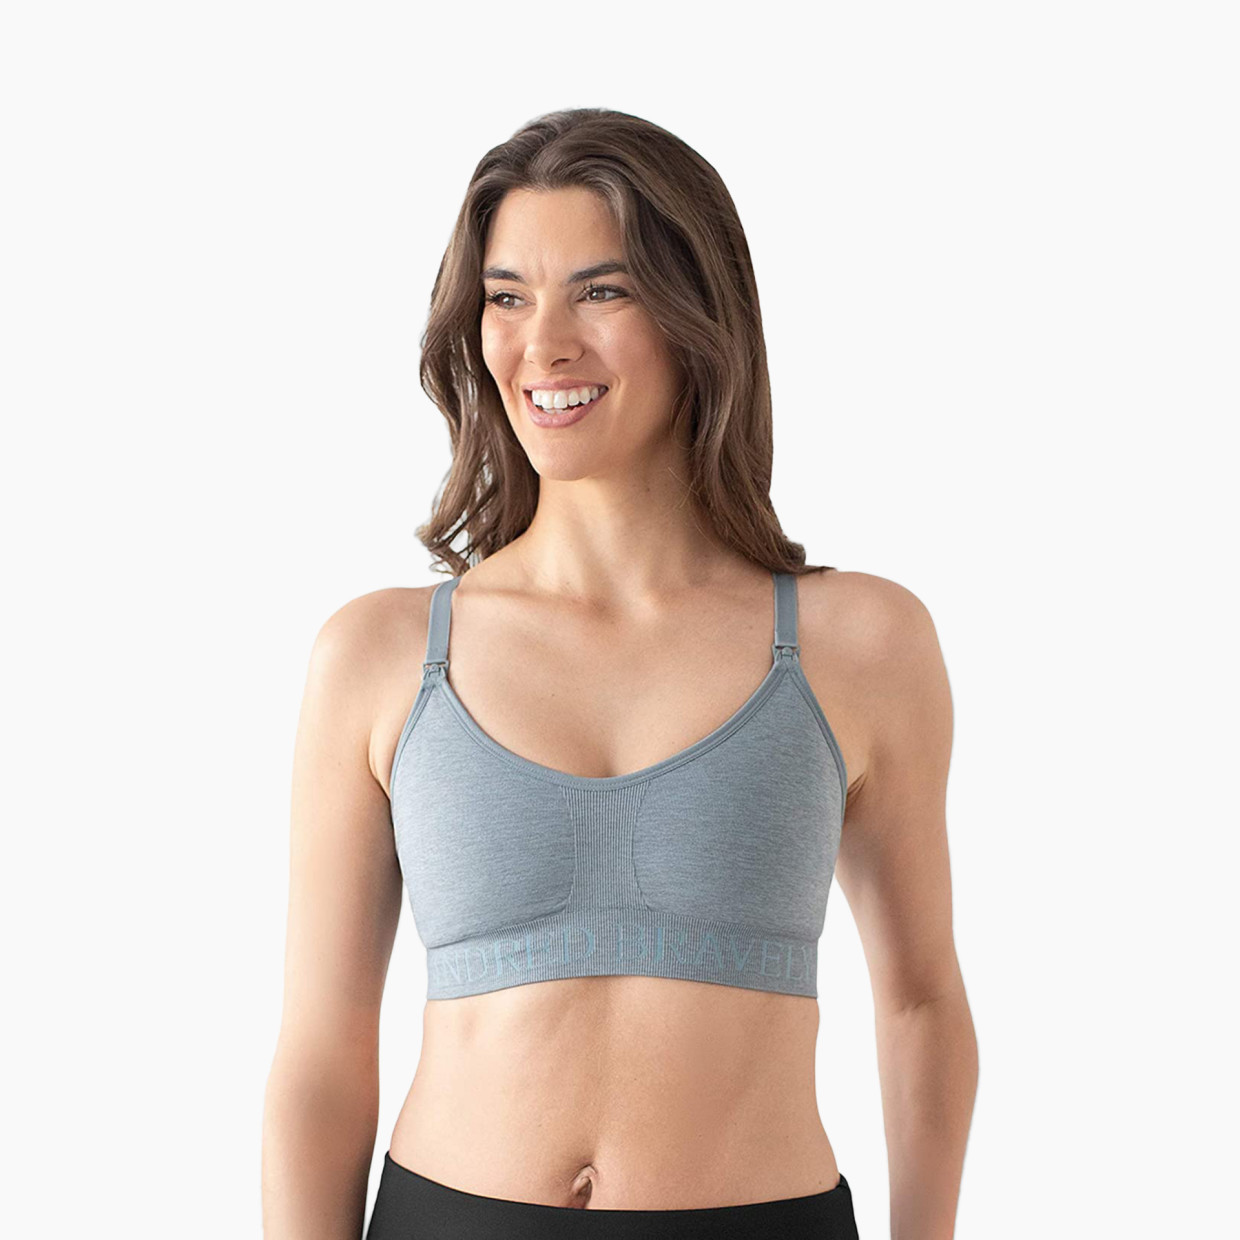 Kindred Bravely Sublime Support Low Impact Nursing & Maternity Sports Bra -  Seaglass Heather, Small